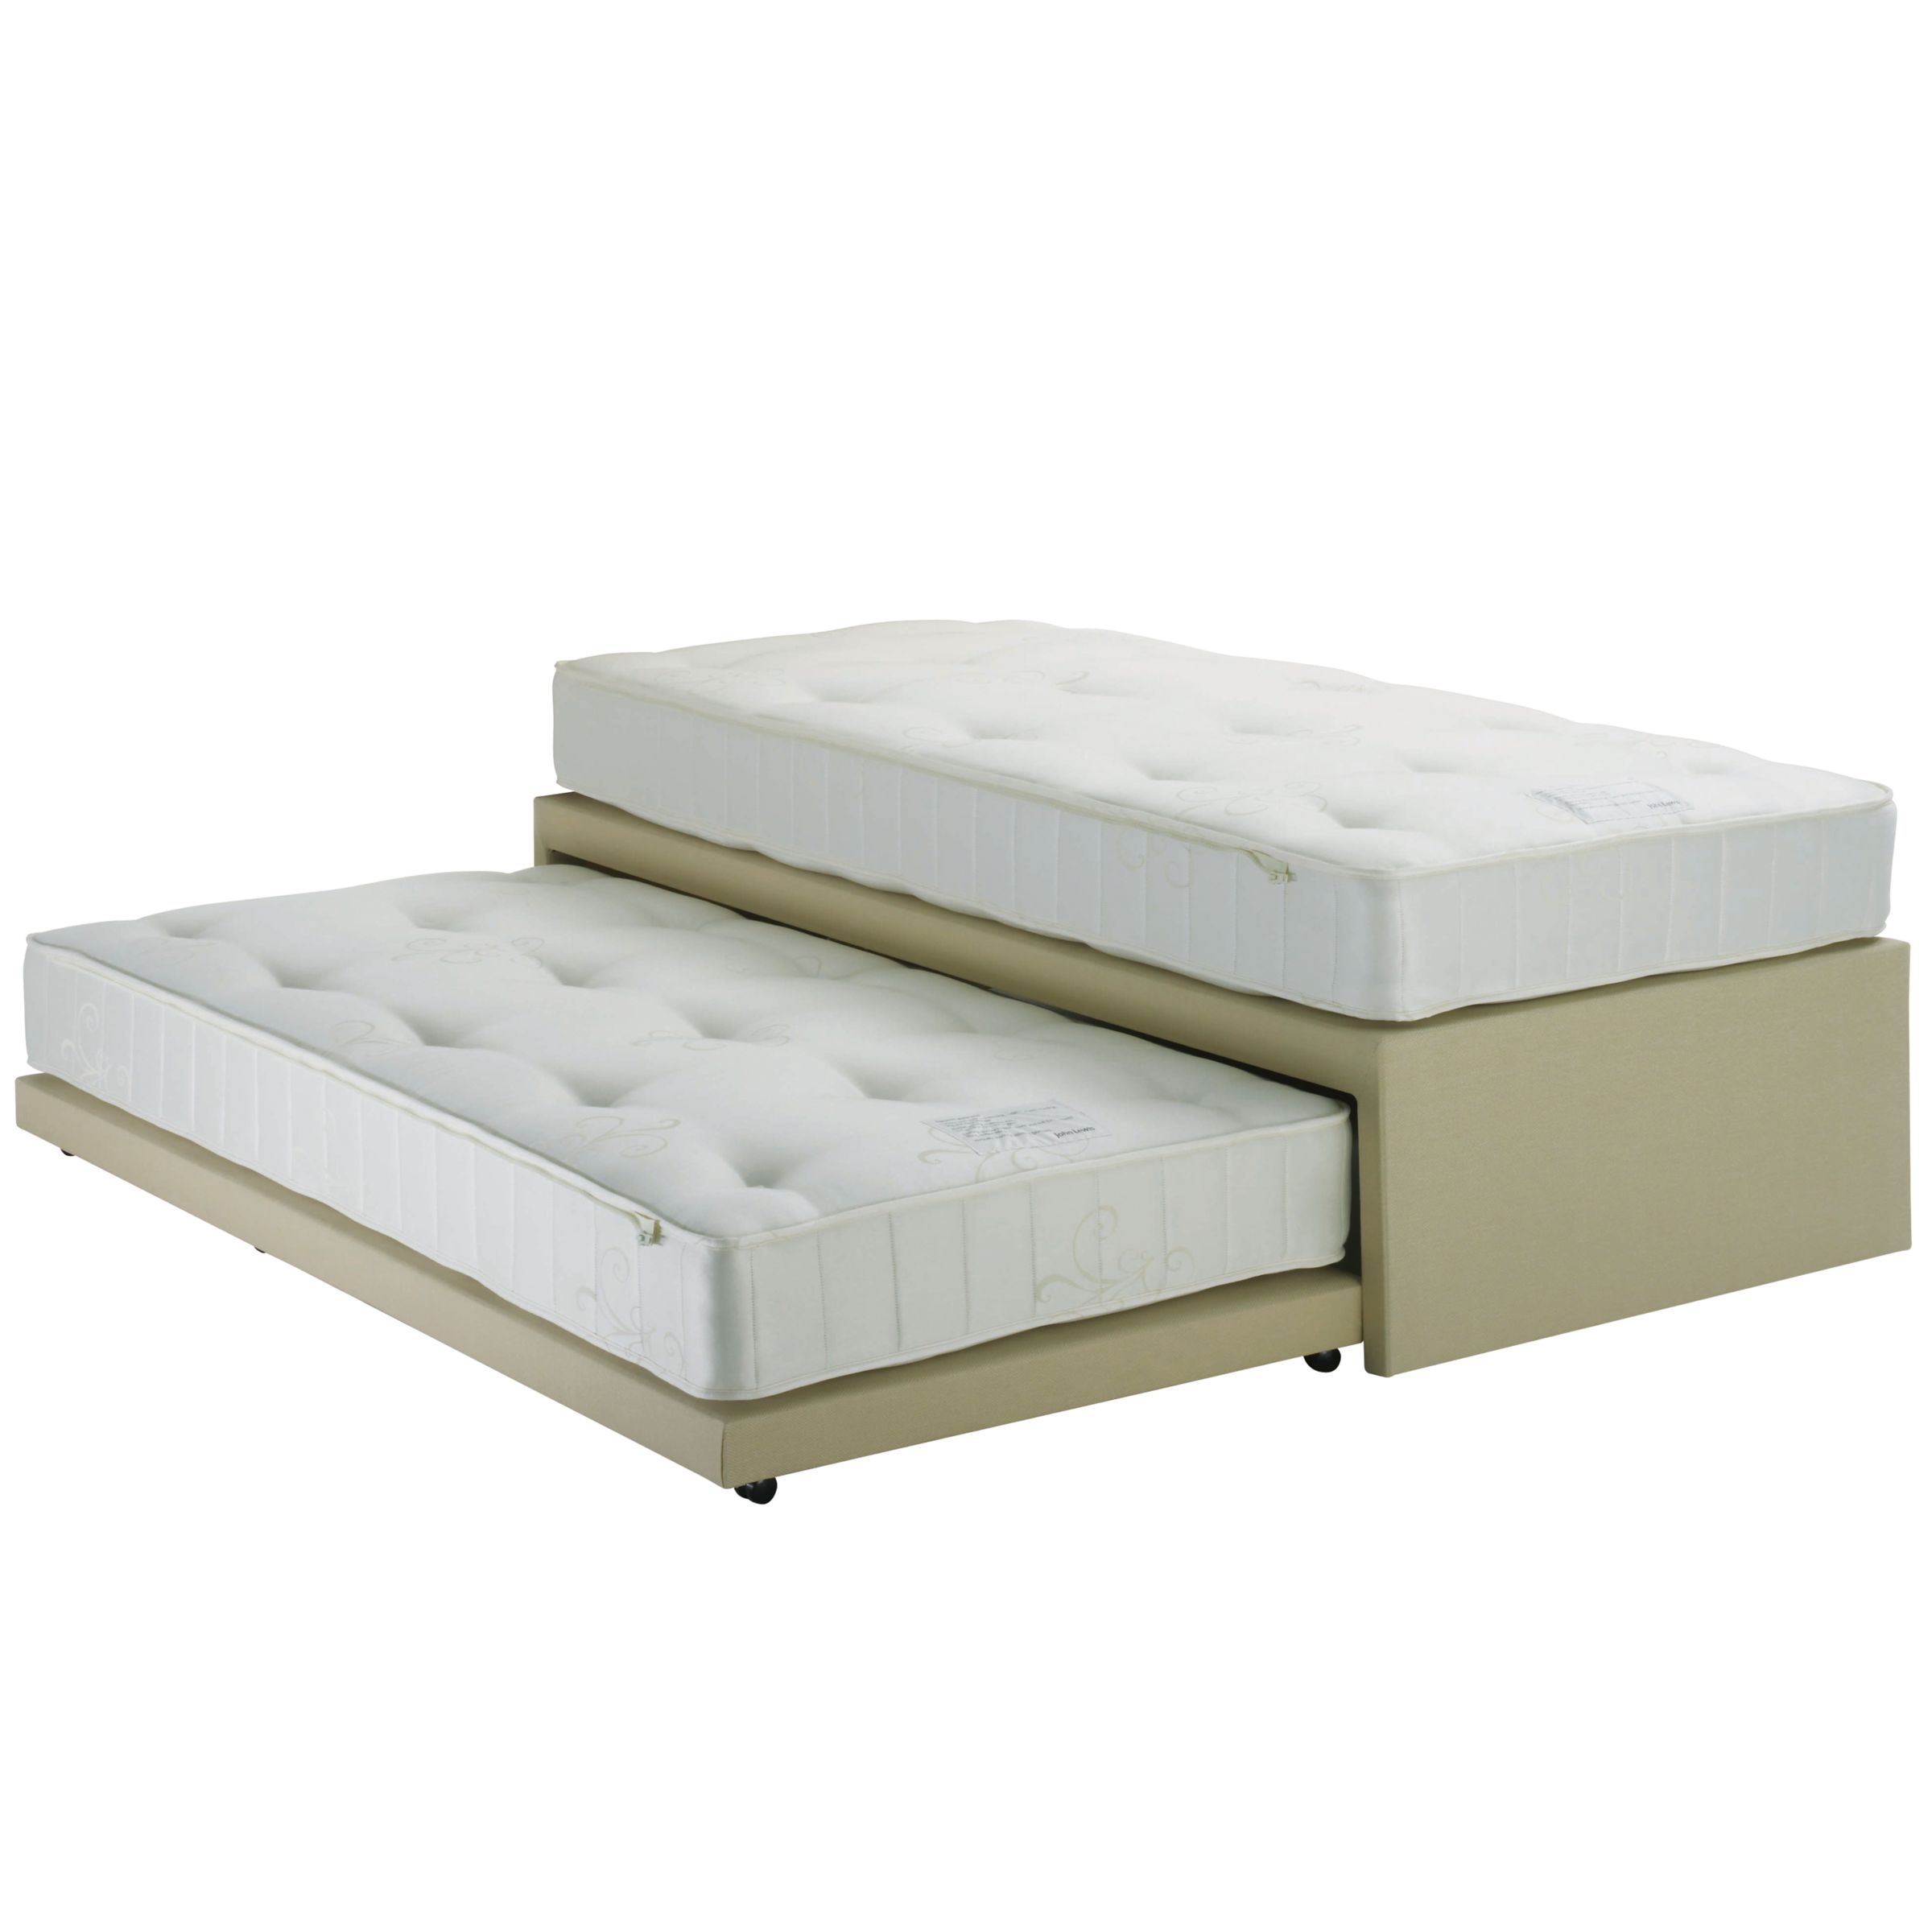 John Lewis Newton Guest Bed, Small Single, 2 Open Spring Mattresses at JohnLewis